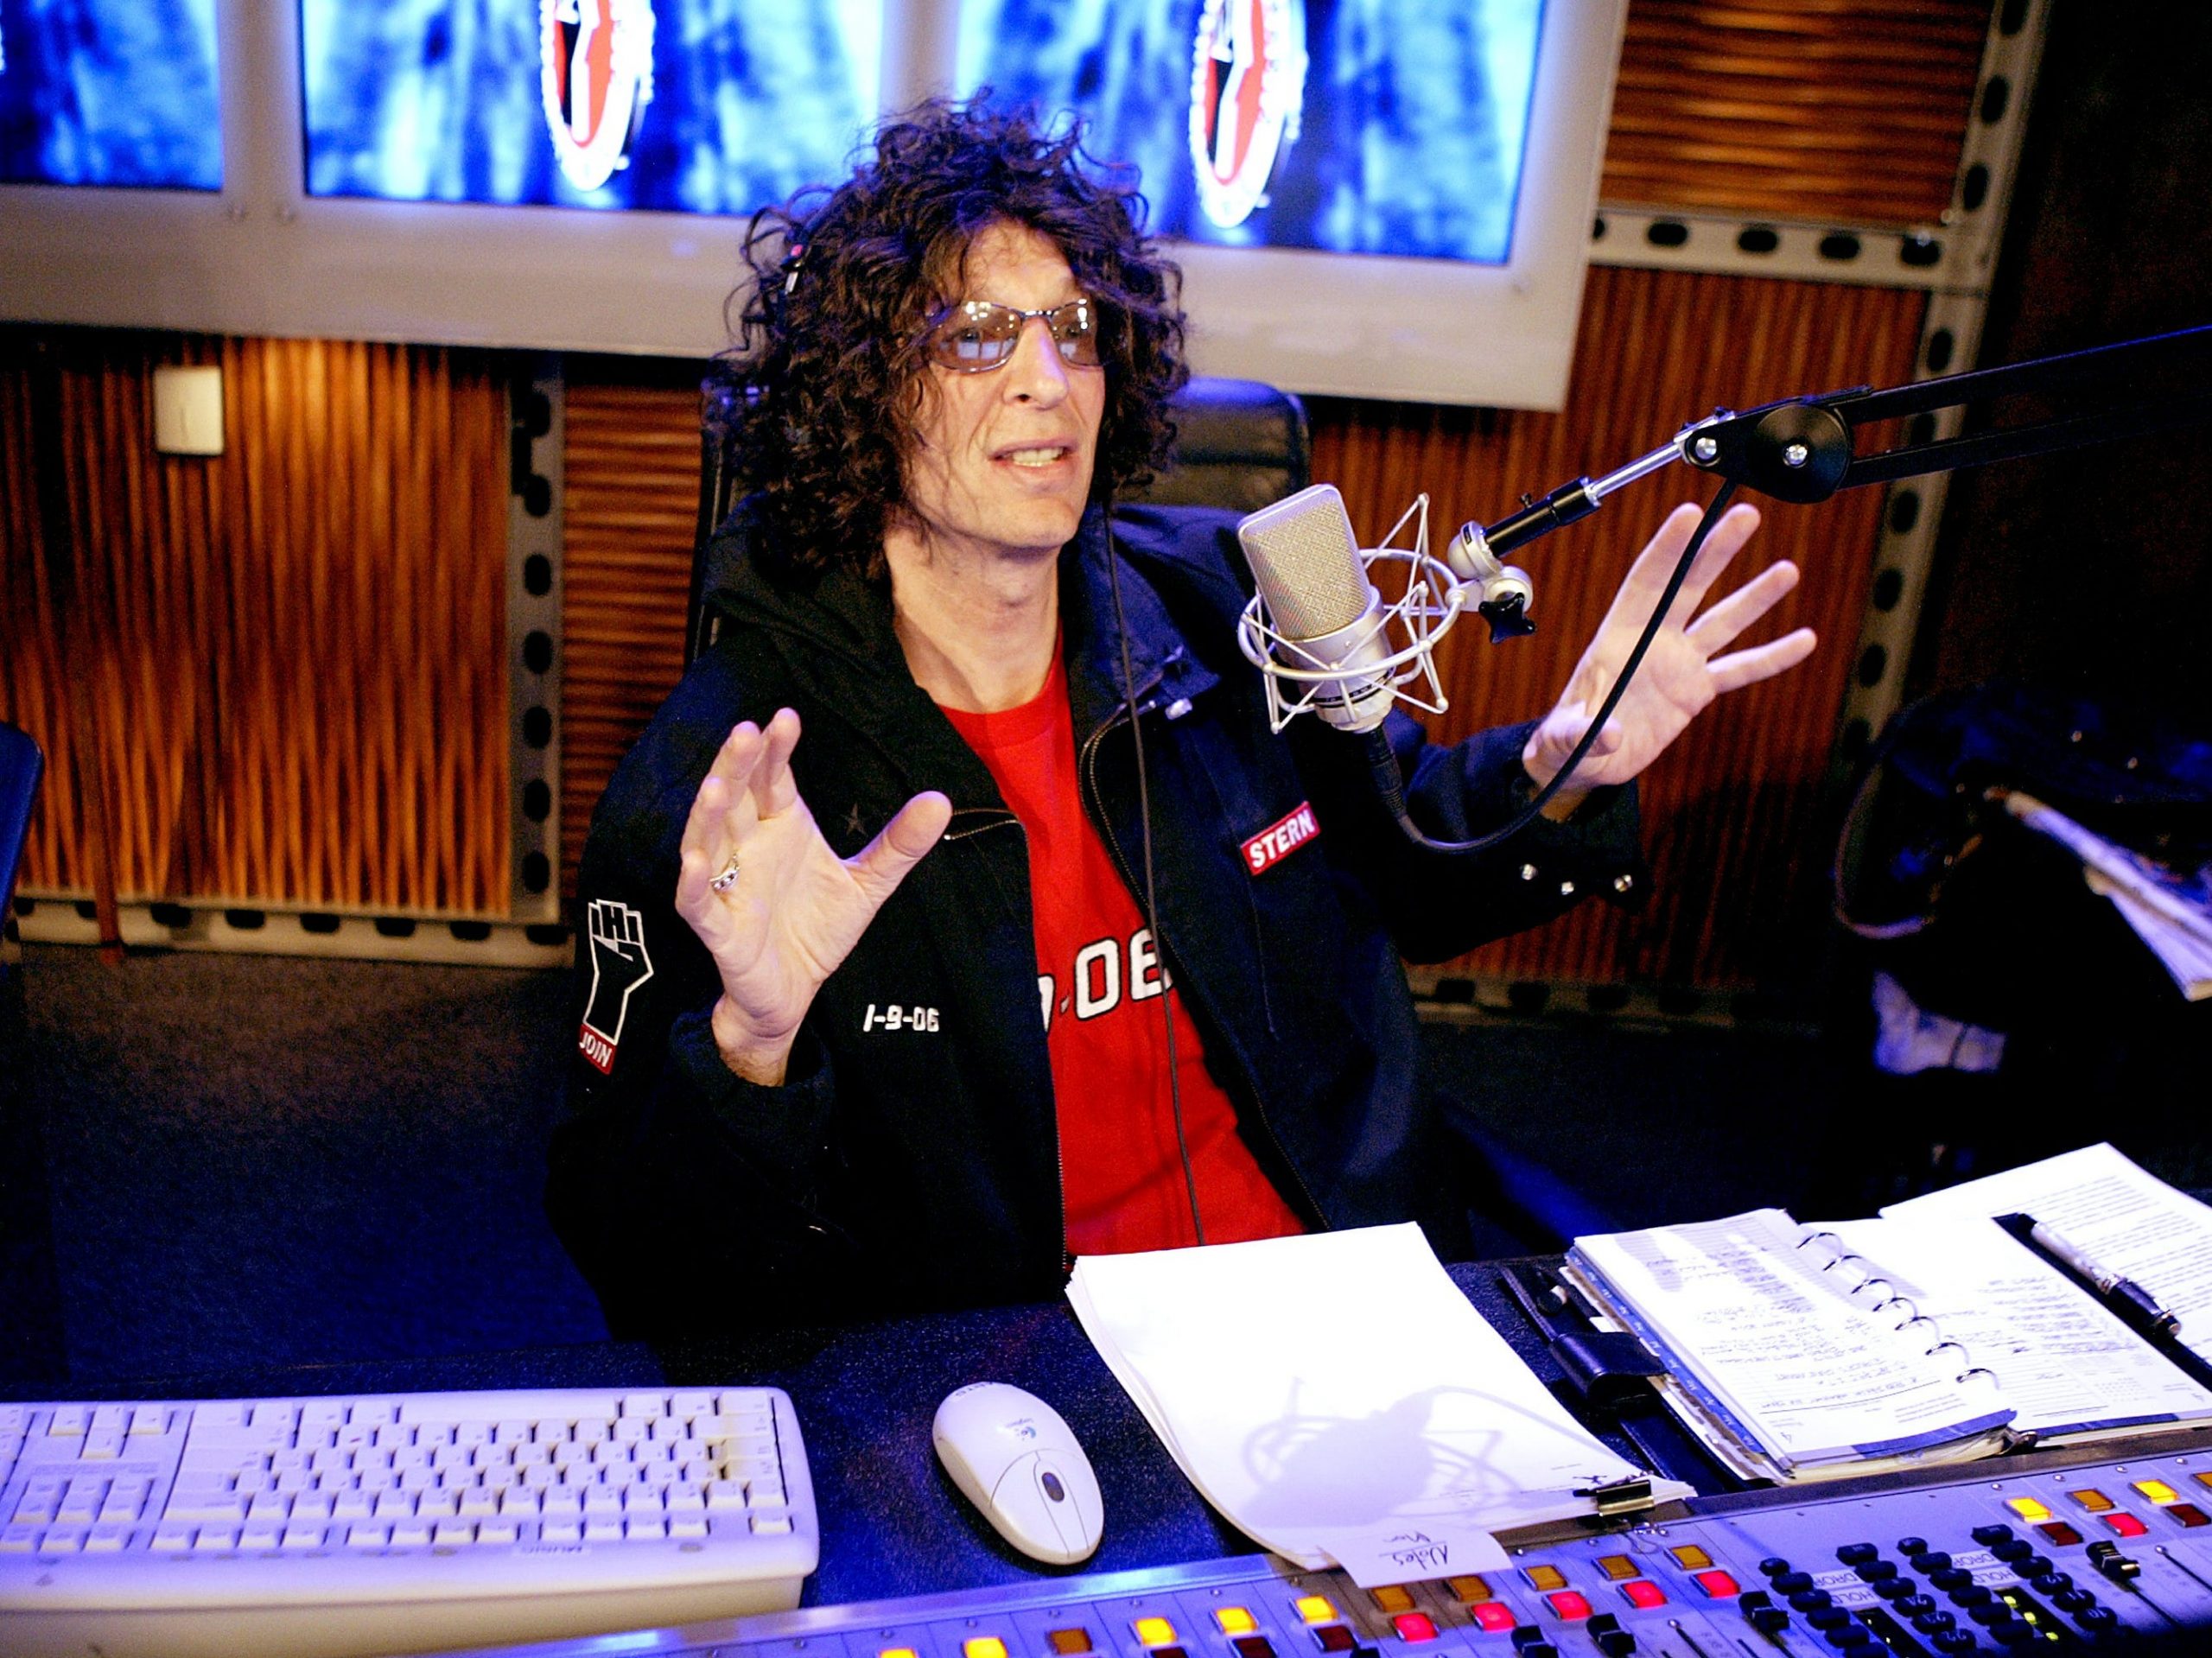 Radio talk show host Howard Stern debuts his show on Sirius Satellite Radio January 09, 2006 at the network's studios at Rockefeller Center in New York City.